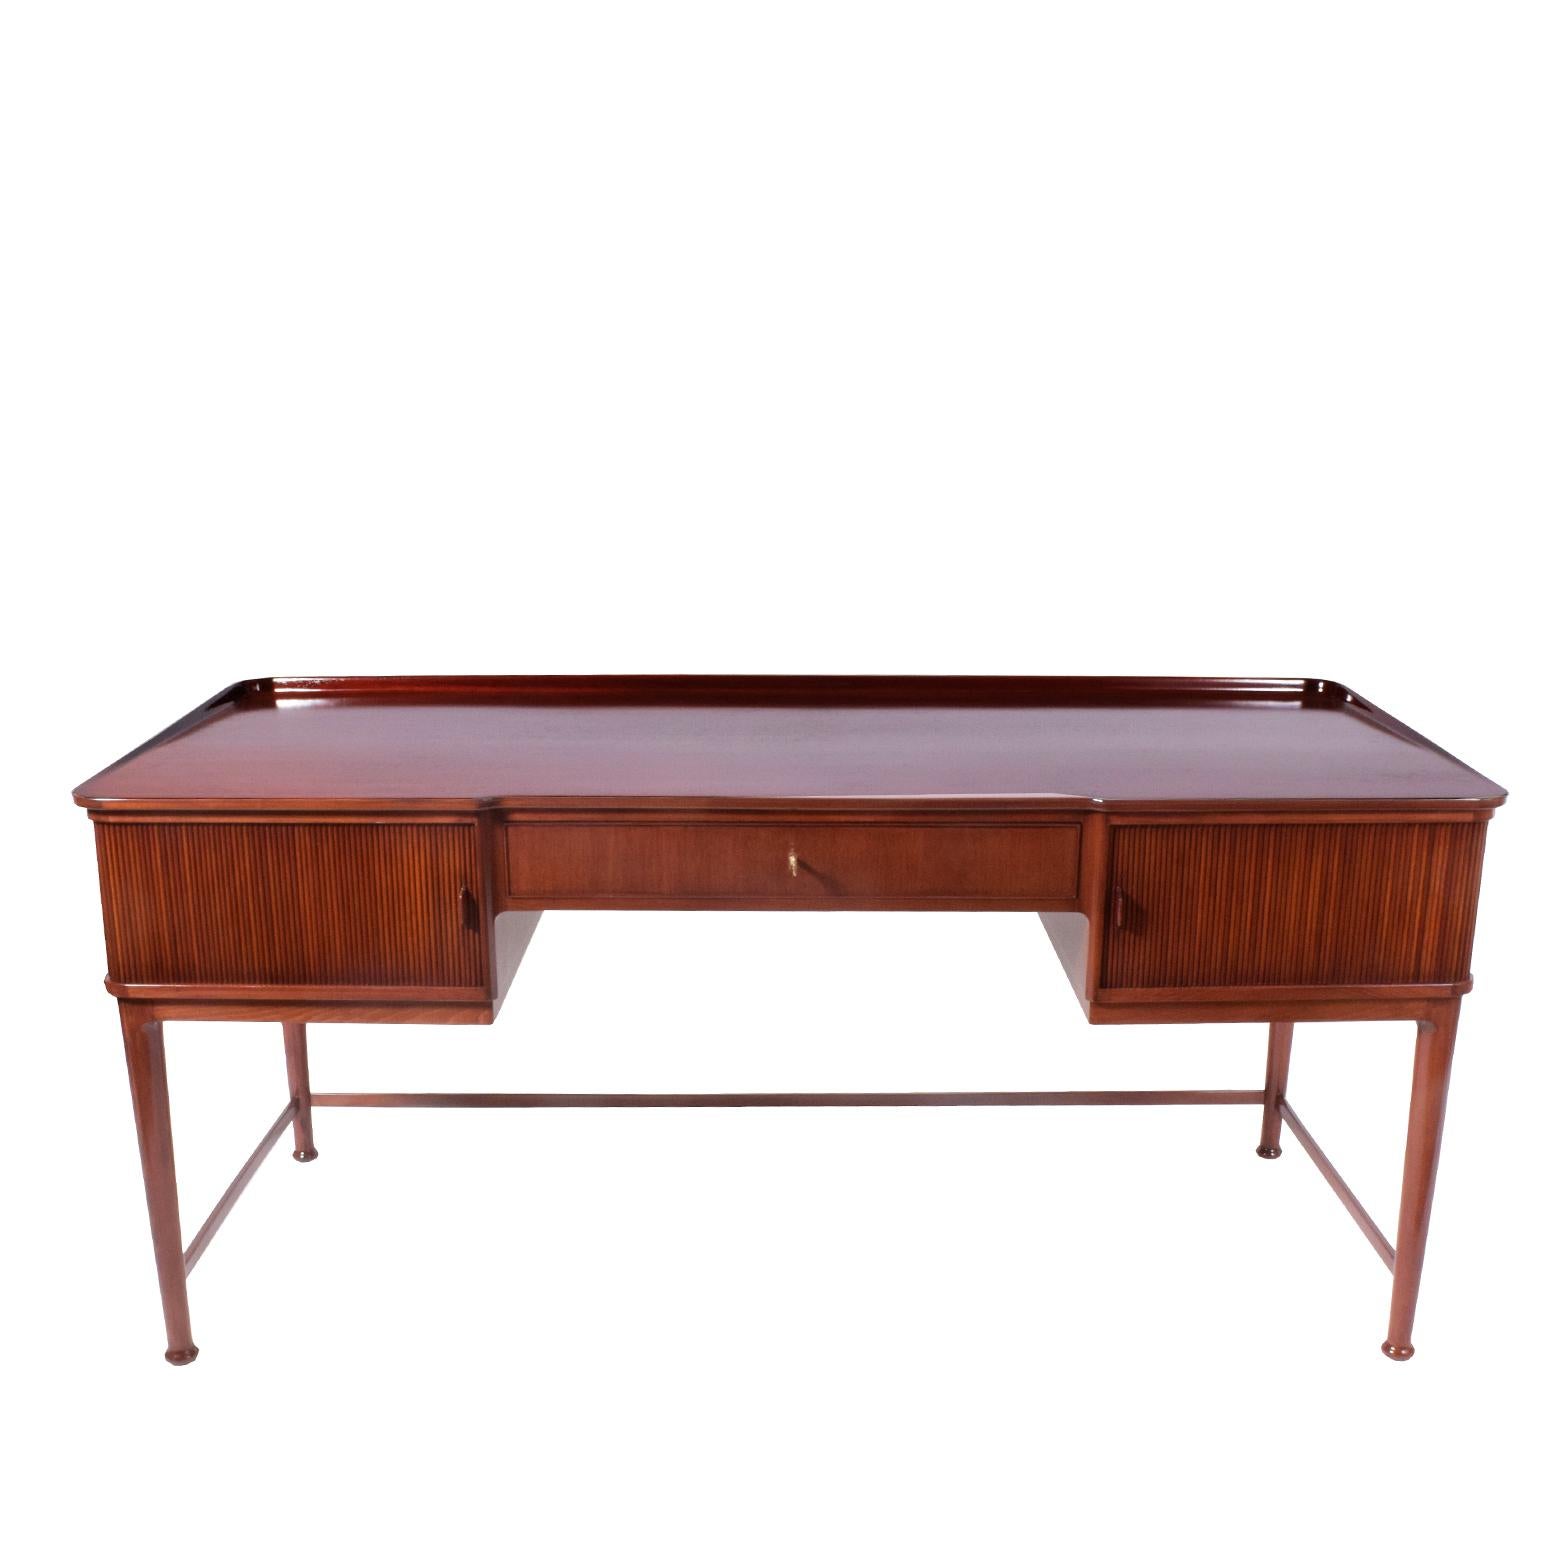 Beautiful mahogany desk with birch interior and tambour doors on each side revealing two drawers each. Top with lip; back of desk also has tambour doors revealing shelves. Made for Svenskt Tenn.